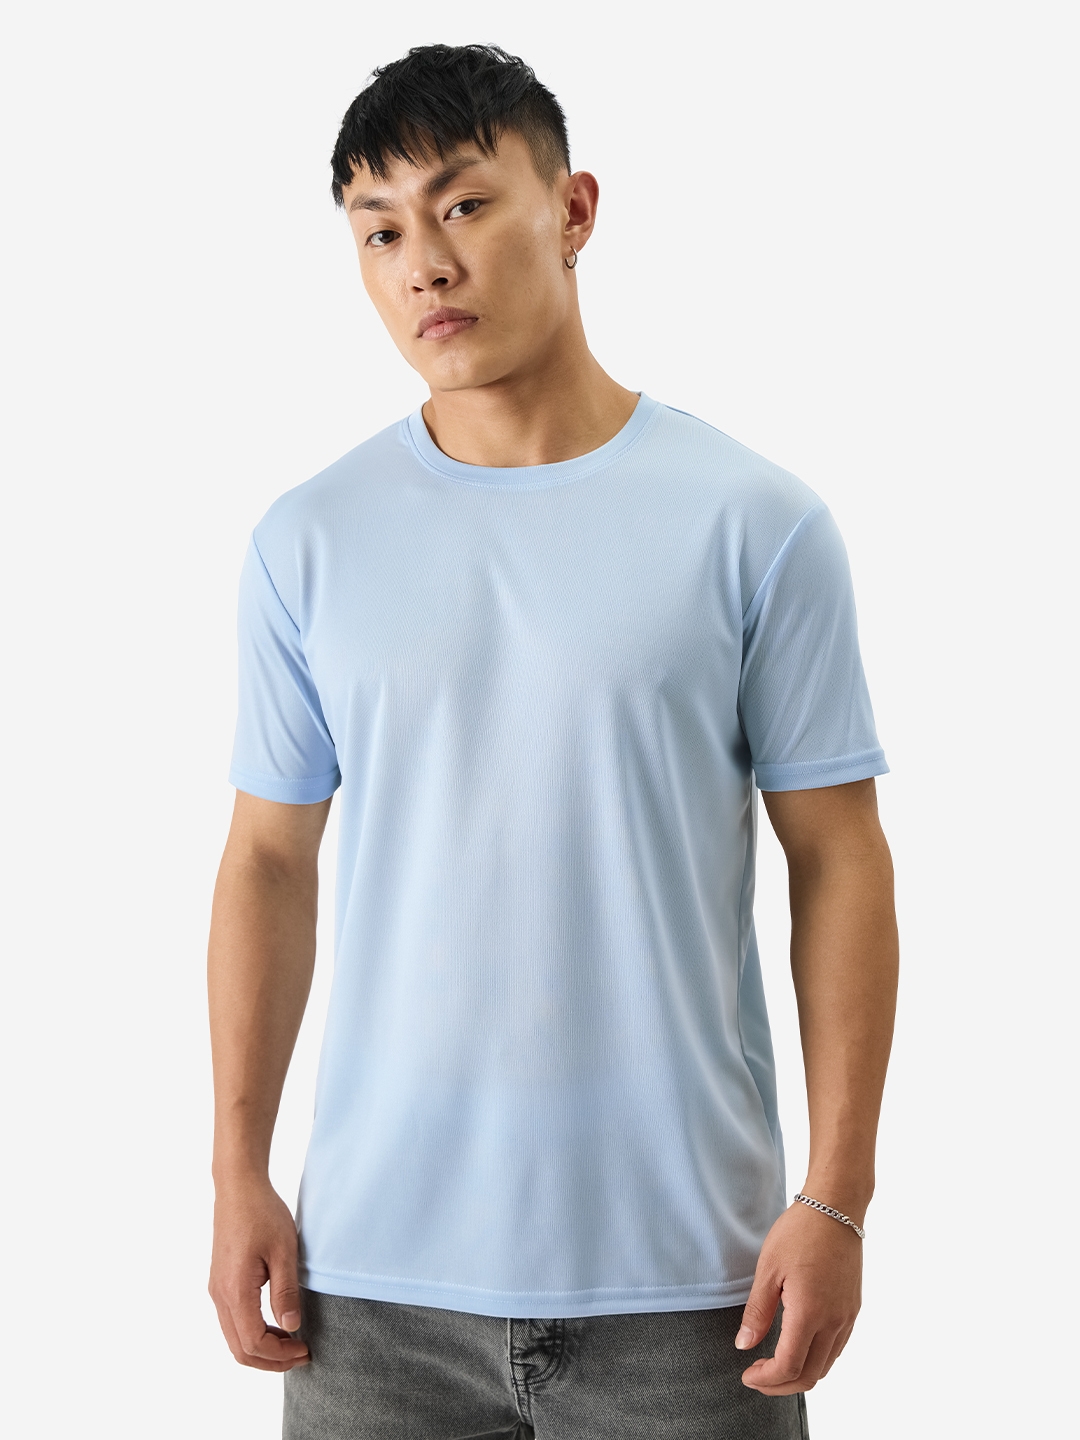 The Souled Store | Men's Solid: Snow Blue T-Shirts